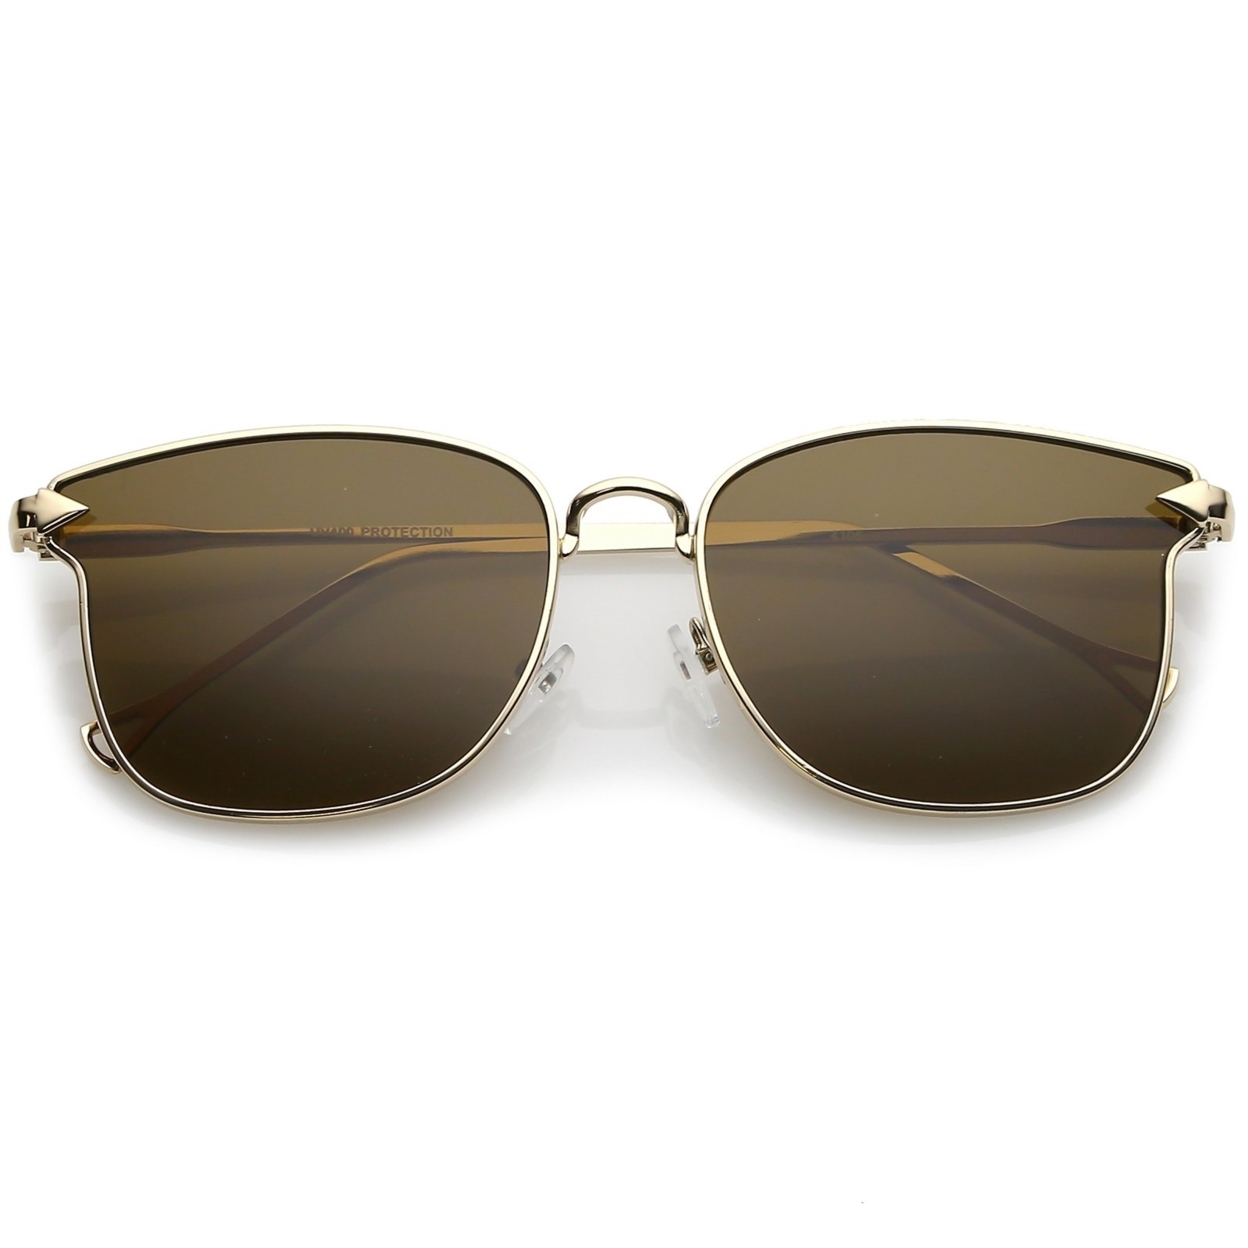 Modern Metal Square Sunglasses With Flat Lenses And Slim Hook Arms 55mm - Gold / Brown